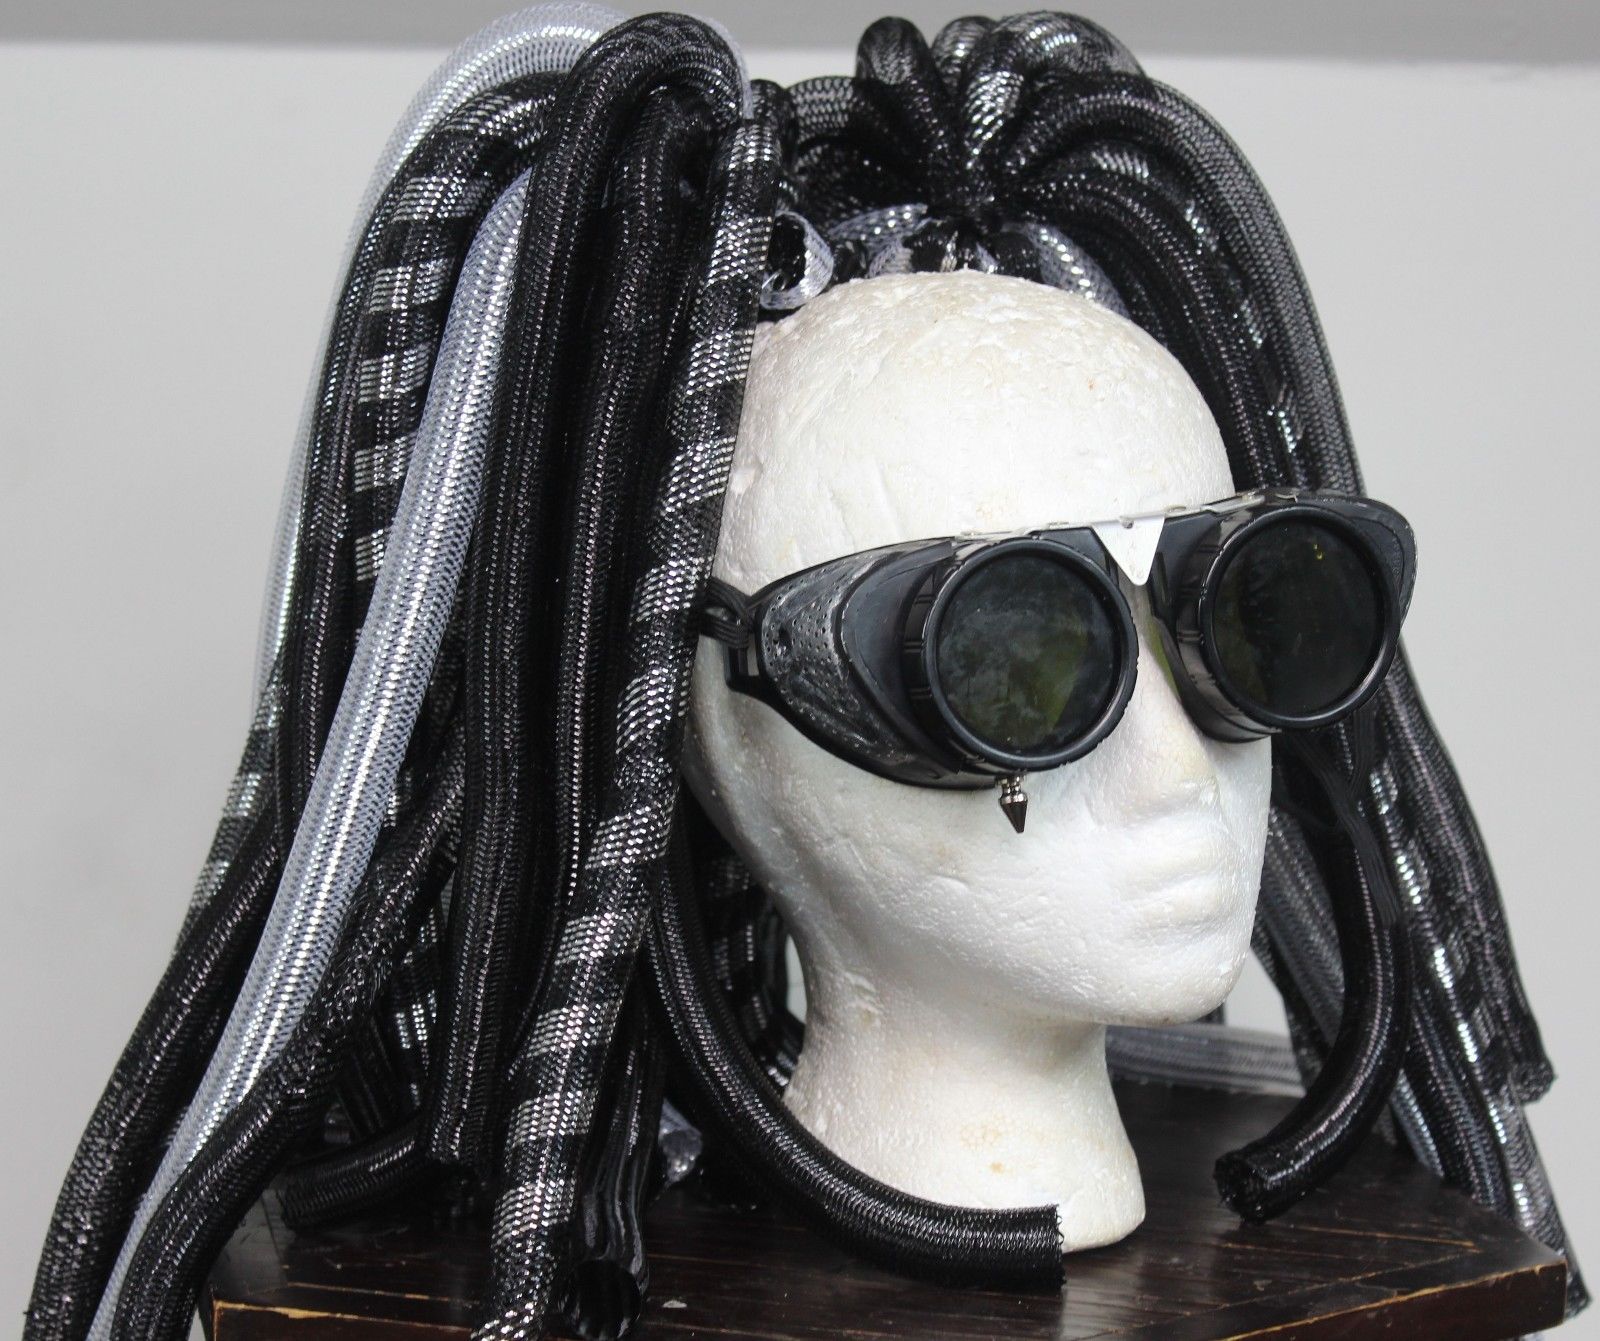 Gothic and Steampunk on Twitter: "#cyberlocks #wig #cybergoth # goth #gothic #raver Buy here: https://t.co/gwFE3tLoY0 / Twitter